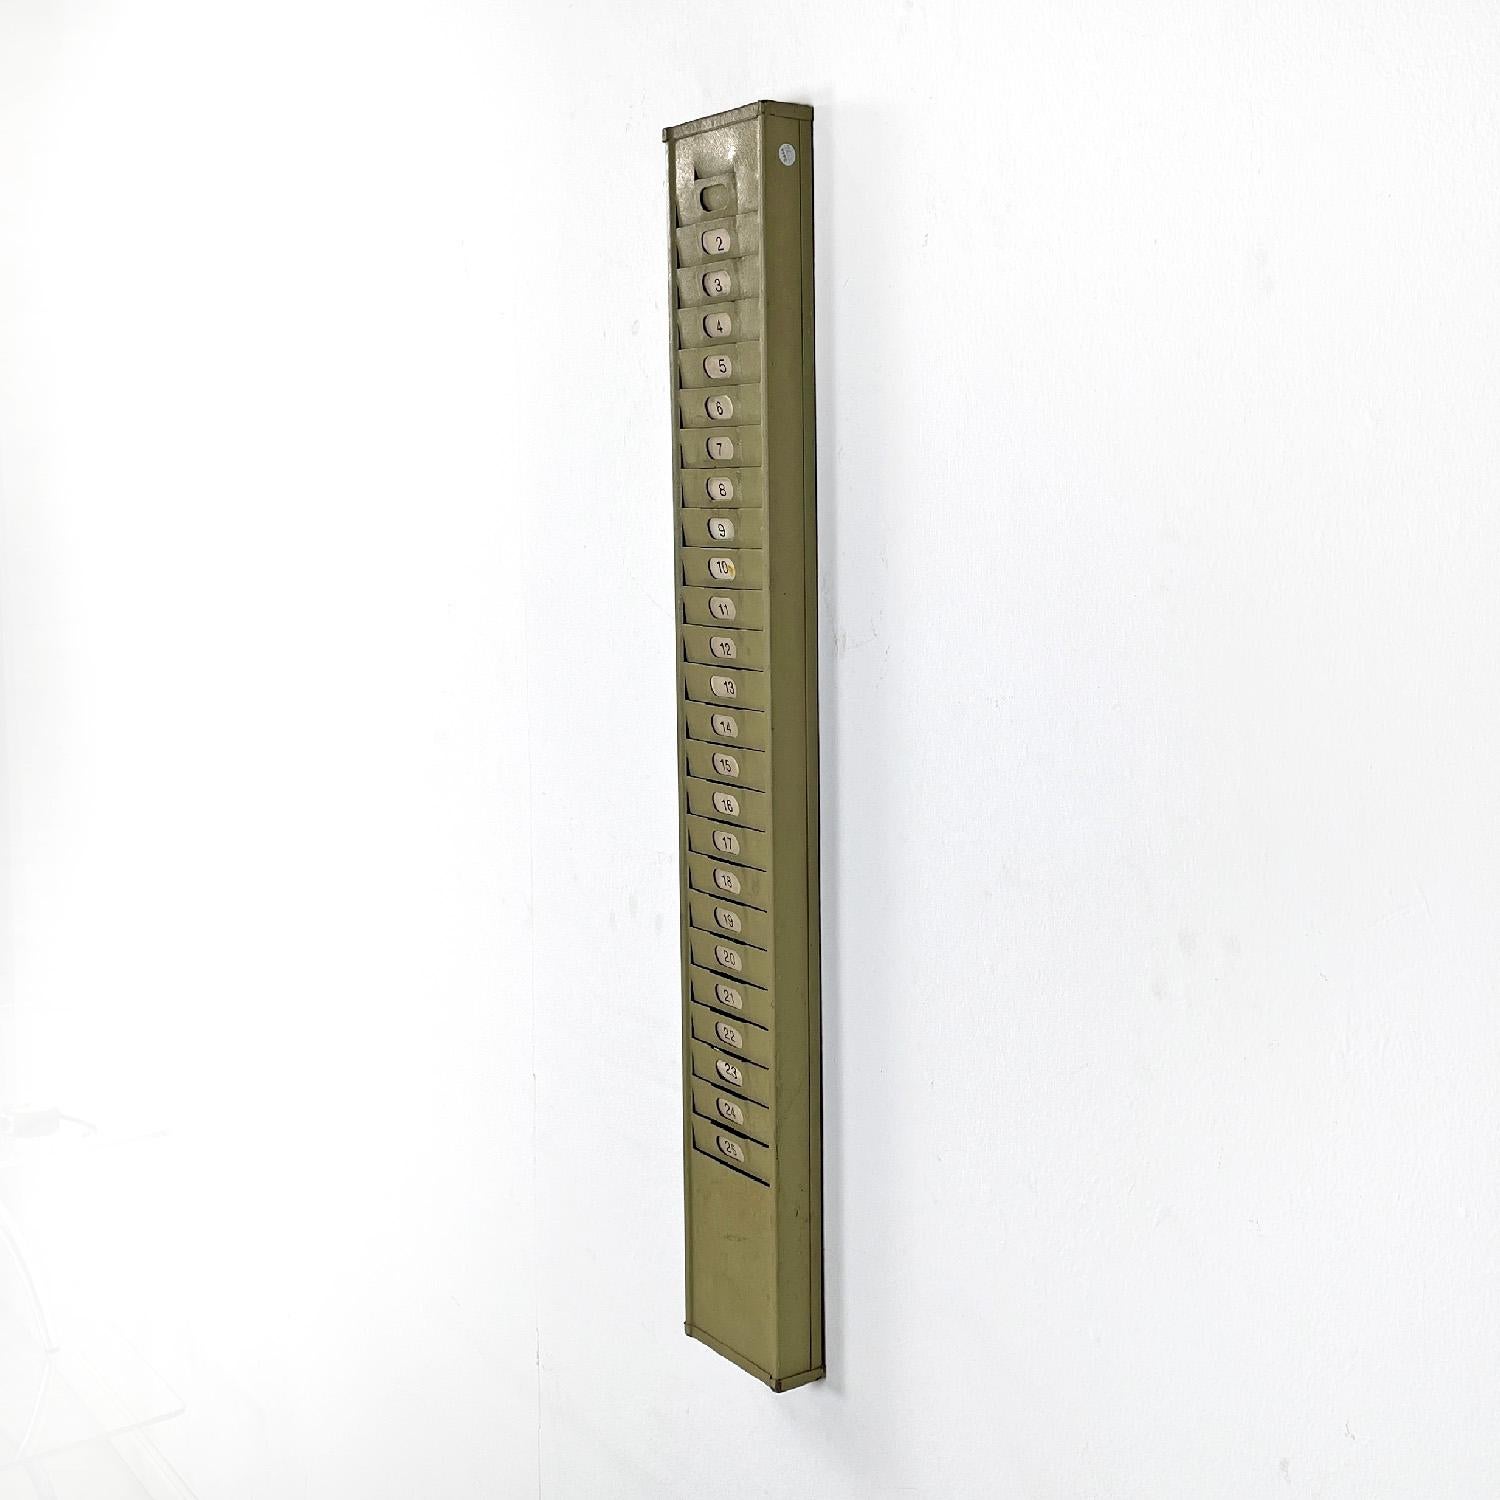 Italian mid-century modern gray metal wall filing cabinet card holder, 1960s
Gray painted rectangular industrial wall card holder or filing cabinet. It has twenty-five numbered places where you can insert cards or tags.
1960s.
Vintage condition, it